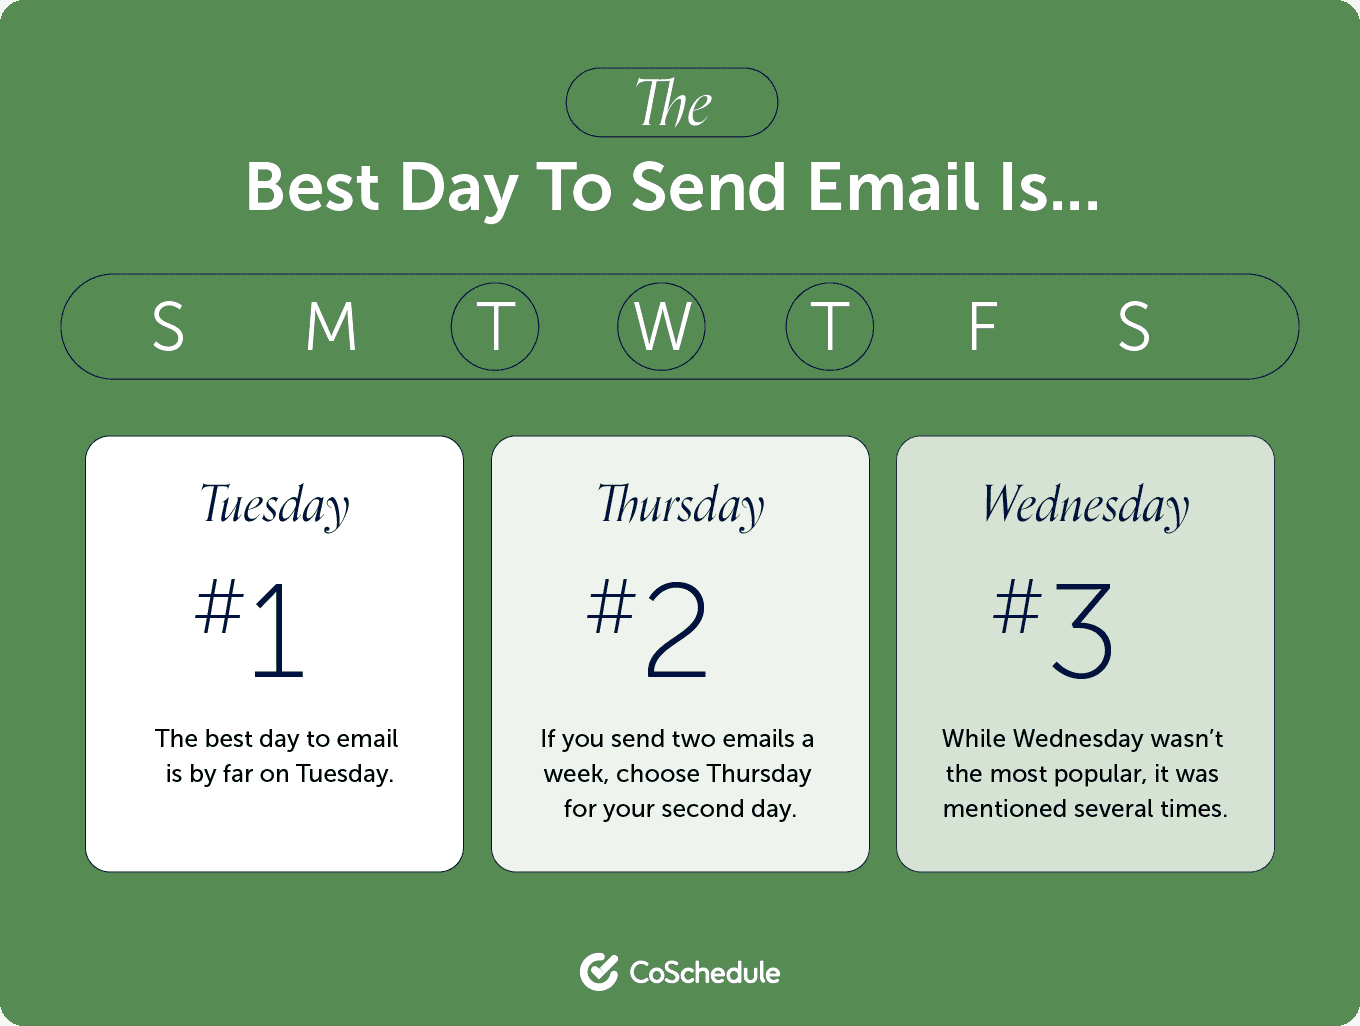 The best days to send emails